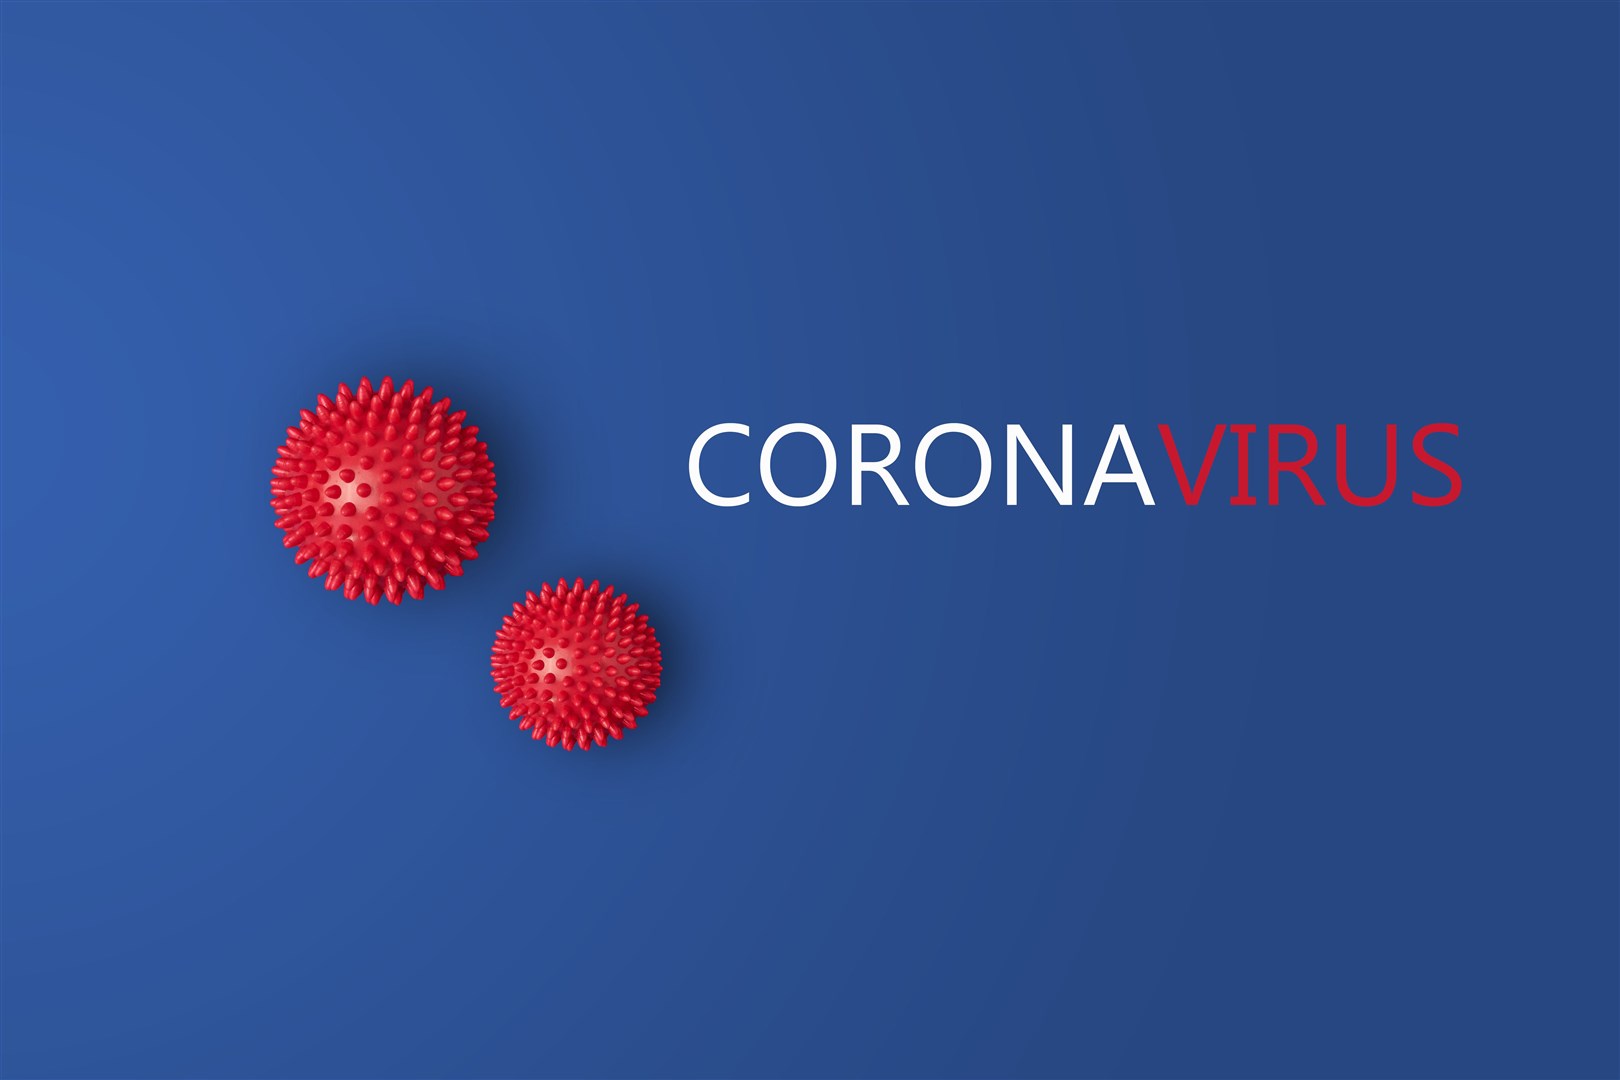 Most people infected with the COVID-19 virus will experience mild to moderate respiratory illness and recover without requiring special treatment.